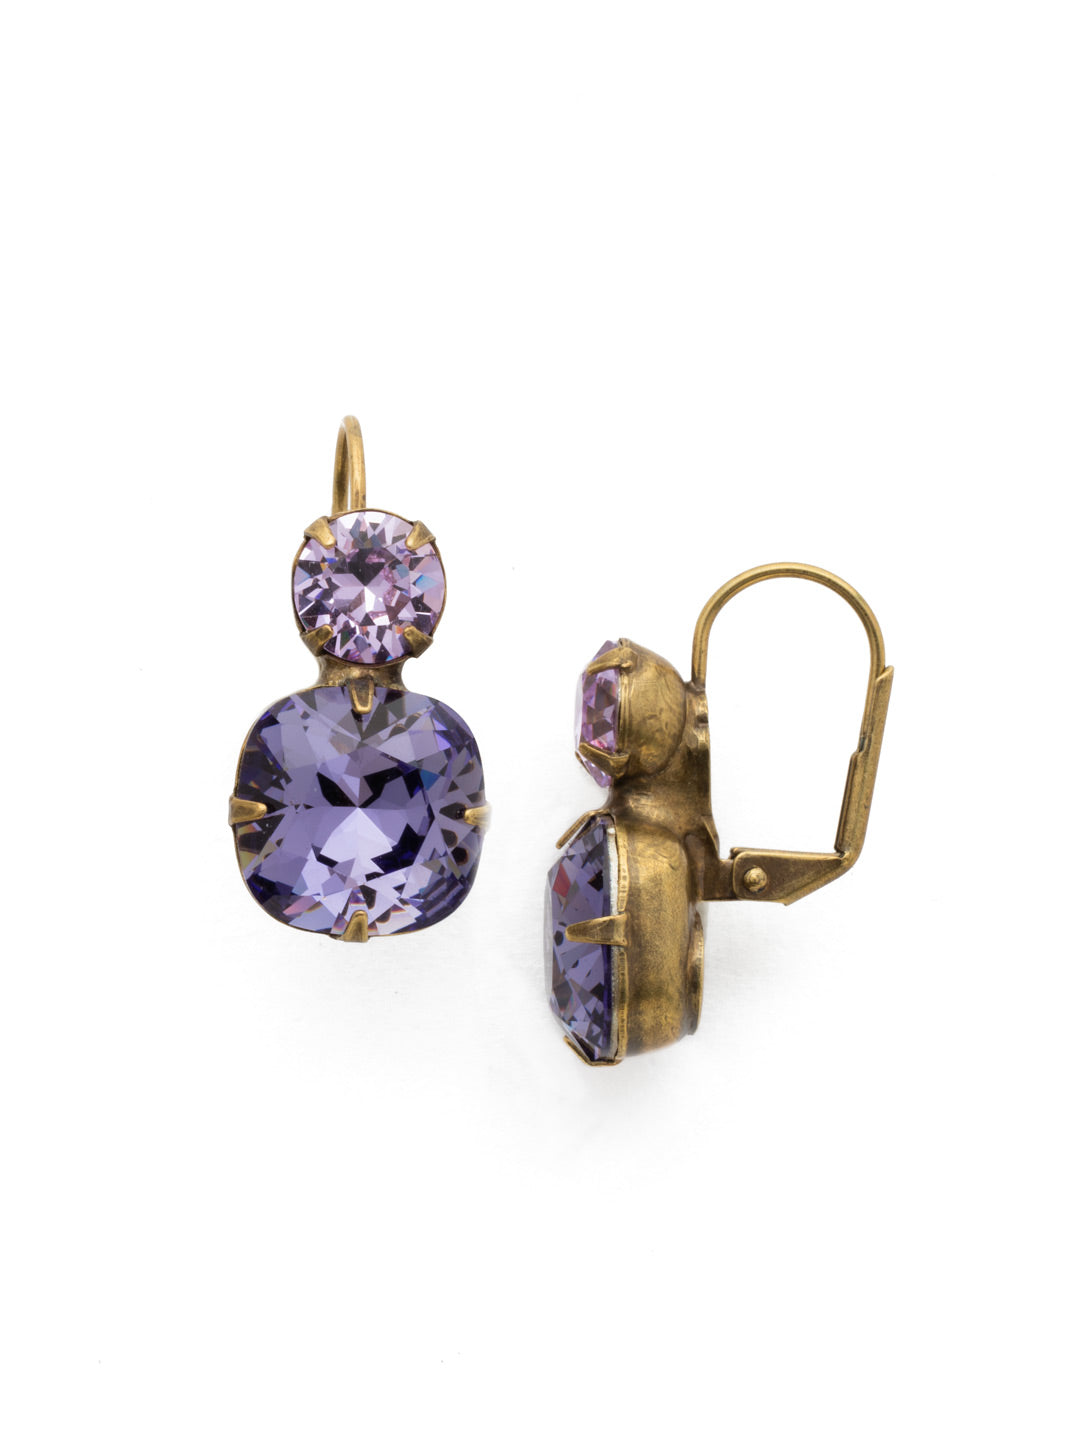 On The Edge Dangle Earrings - ECL4AGVI - <p>It's simple - round and cushion cut crystals on a french wire earring. These earrings go with anything! You can rest easy knowing you have the perfect go-to pair of earrings in your jewelry box. From Sorrelli's Violet collection in our Antique Gold-tone finish.</p>